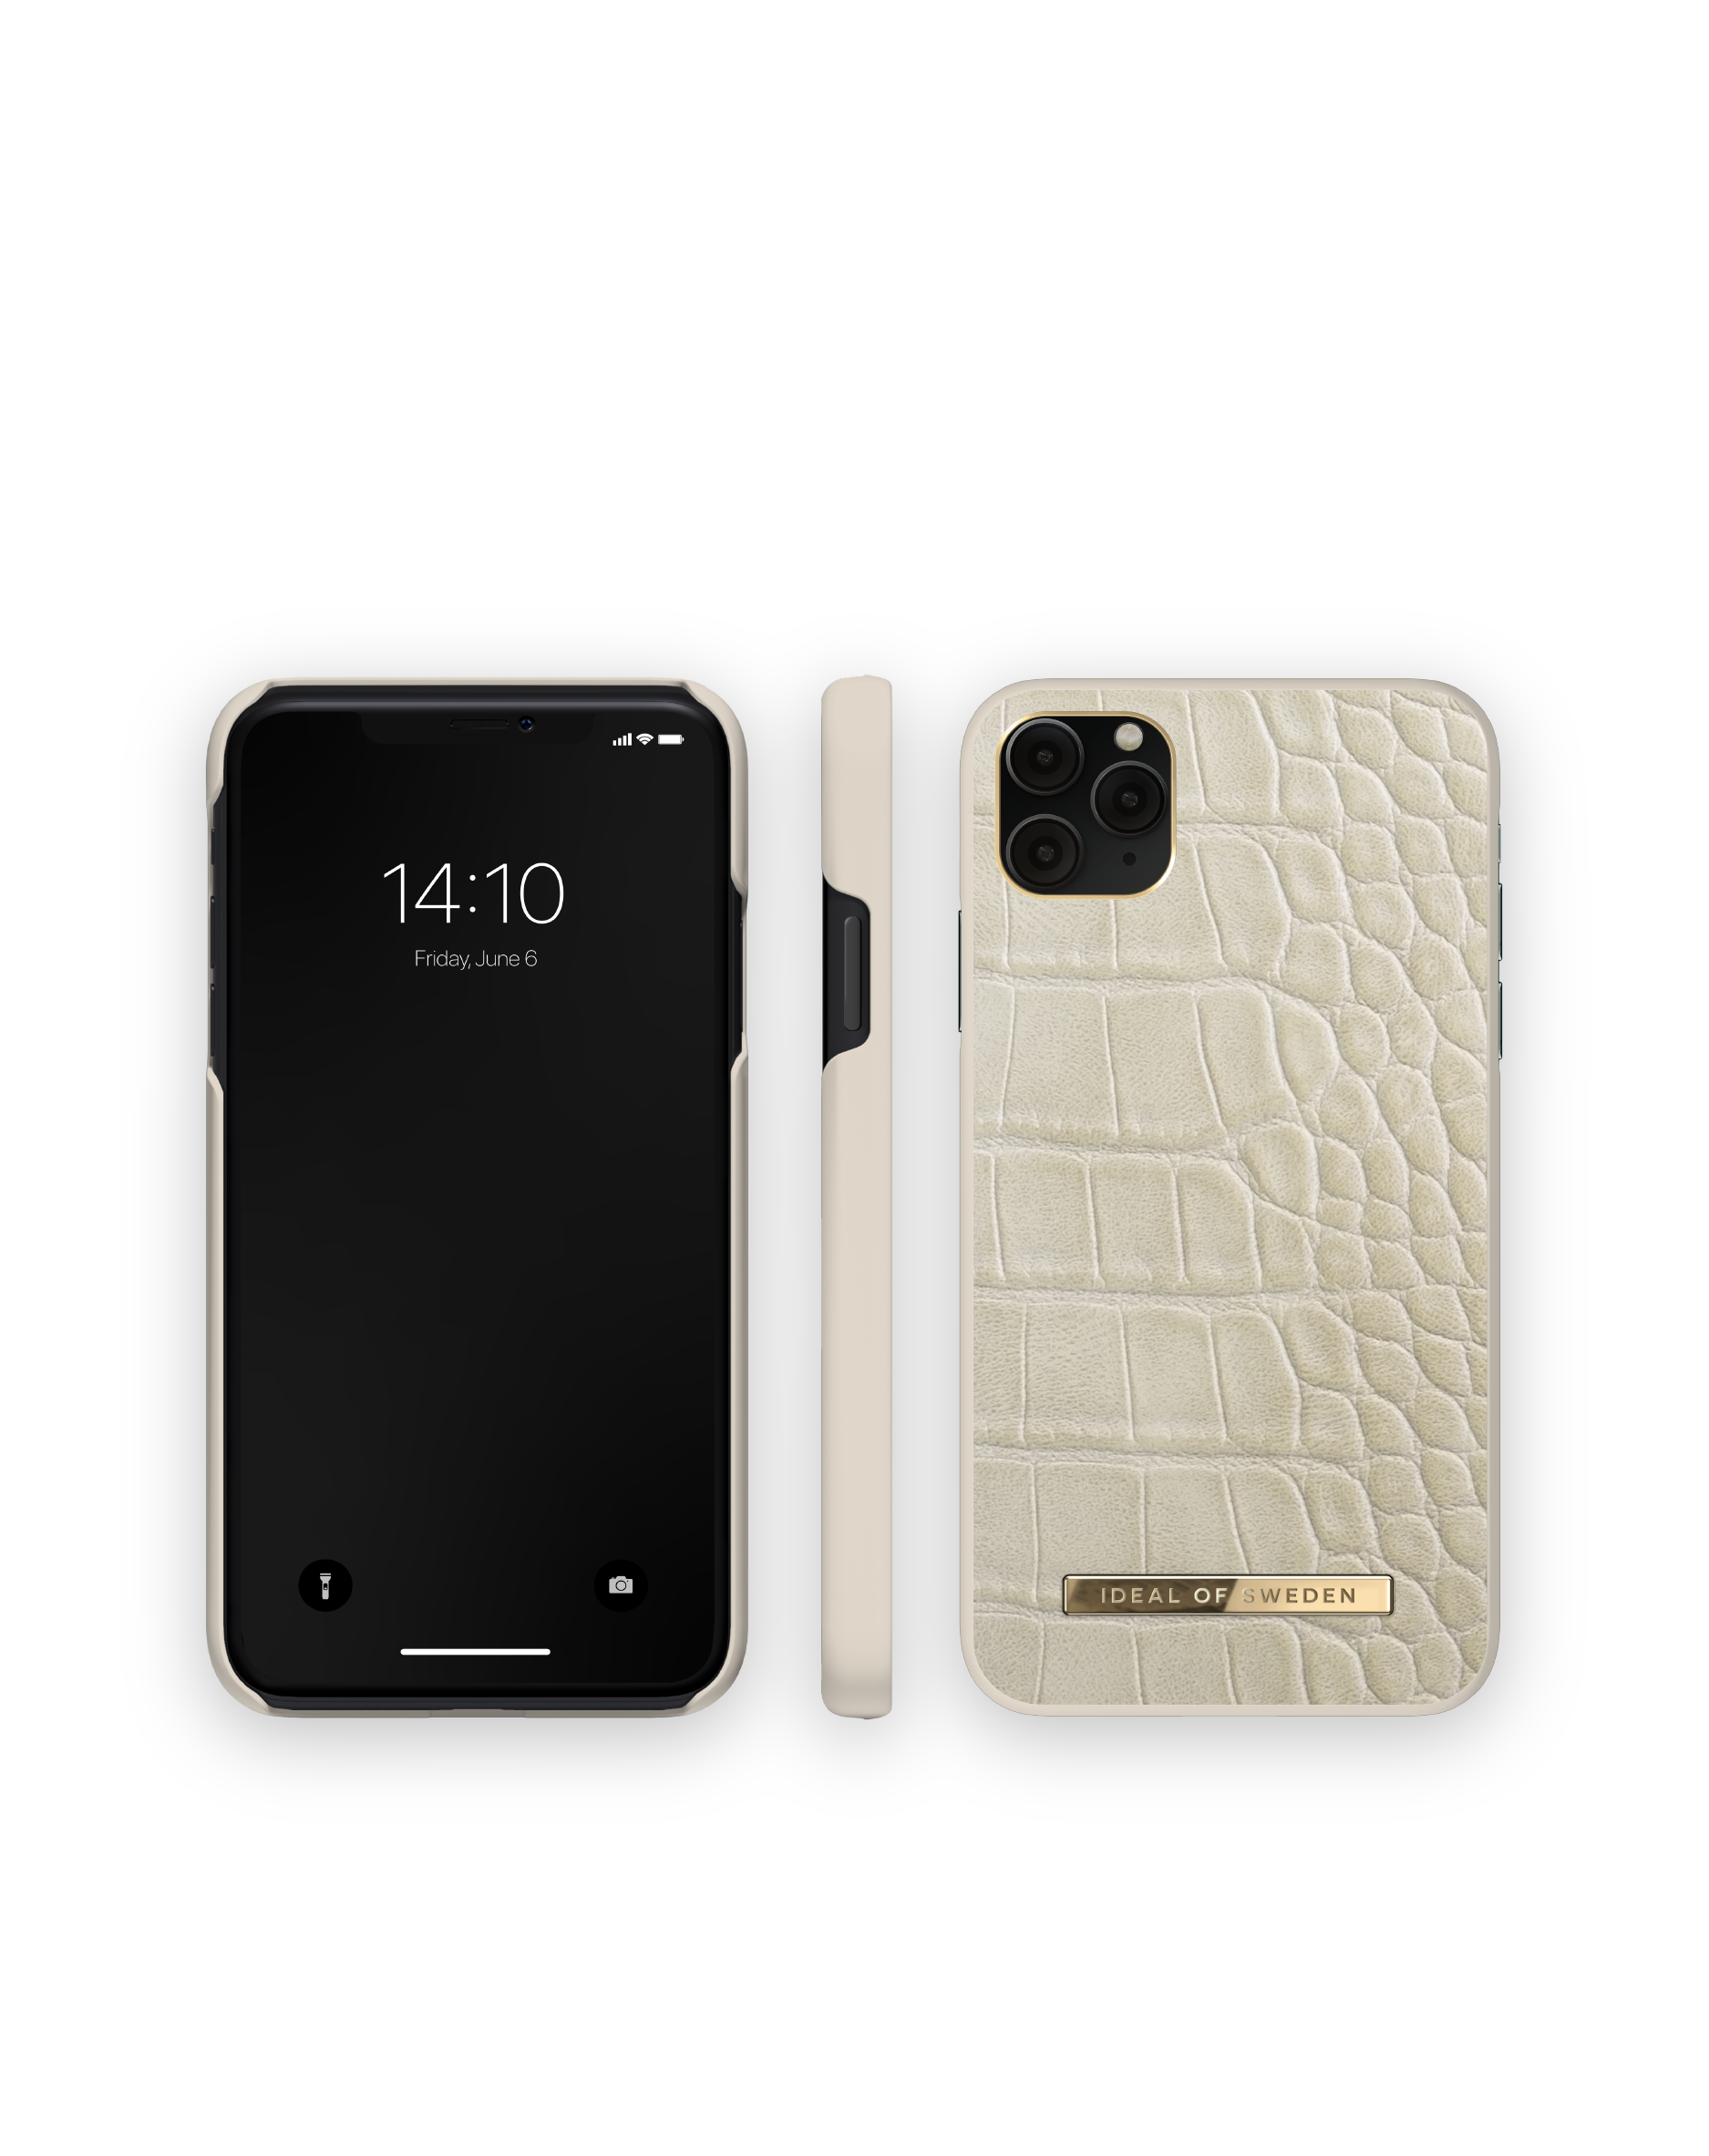 IDEAL OF SWEDEN IDACAW20-1965-243, Backcover, XS Caramel Apple iPhone Pro Apple, Max, Max, Croco iPhone Apple 11